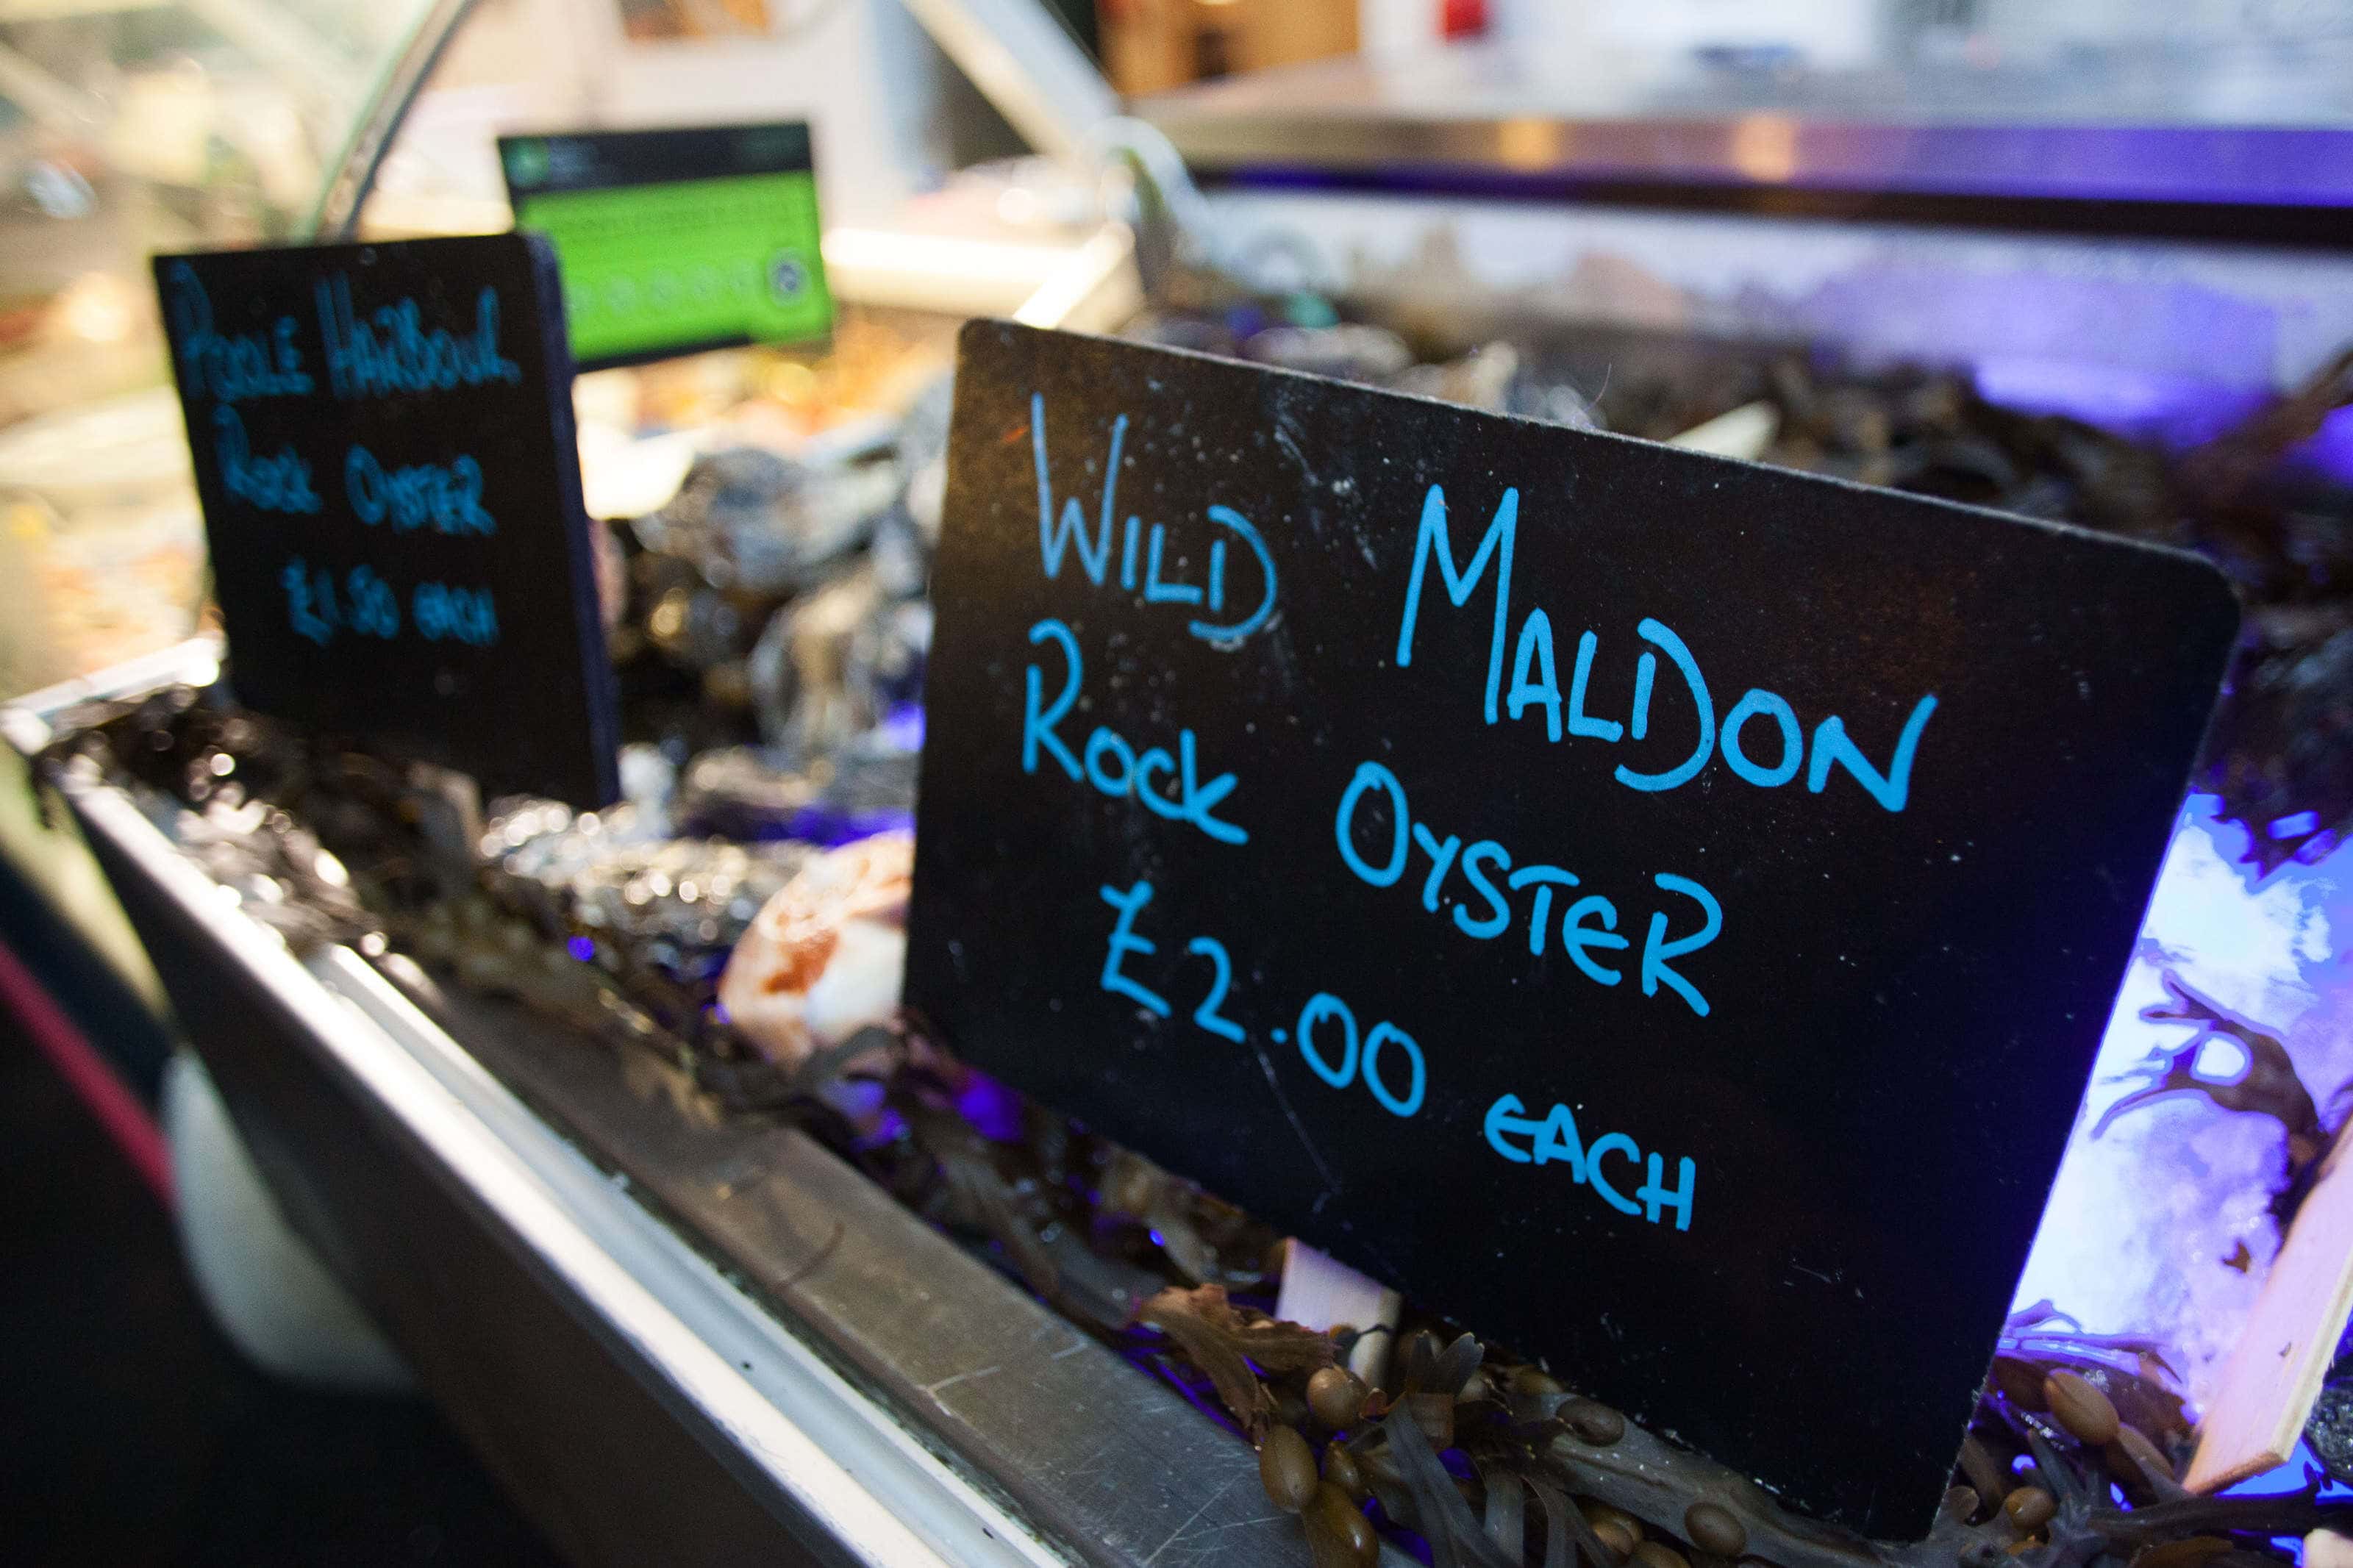 A sign for wild molden rock oysters